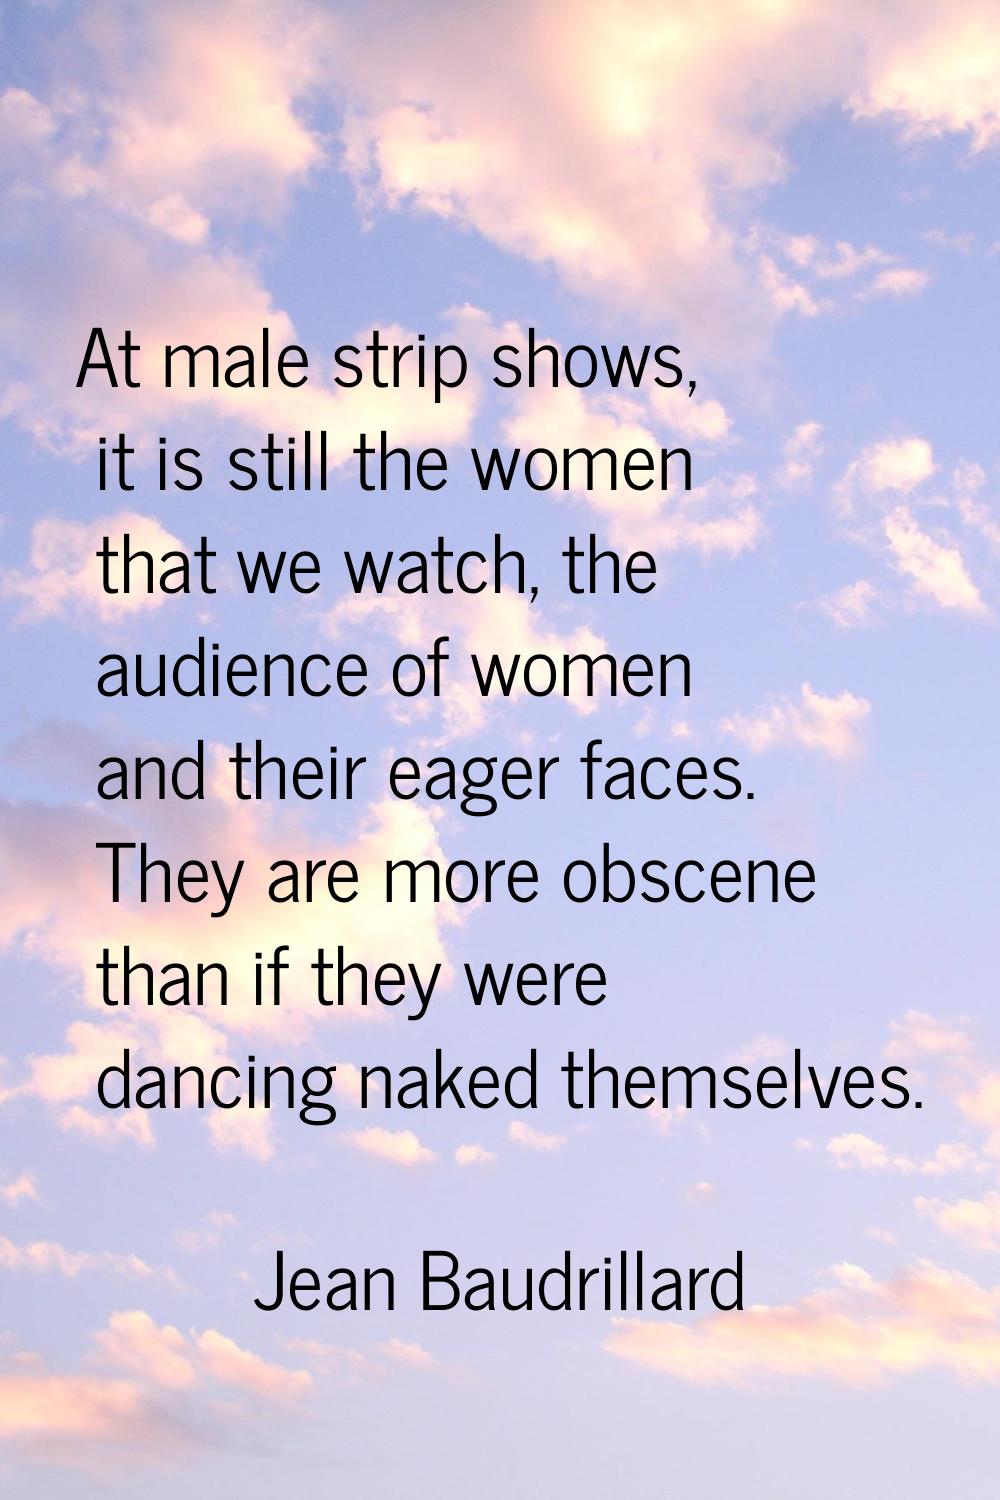 At male strip shows, it is still the women that we watch, the audience of women and their eager fac